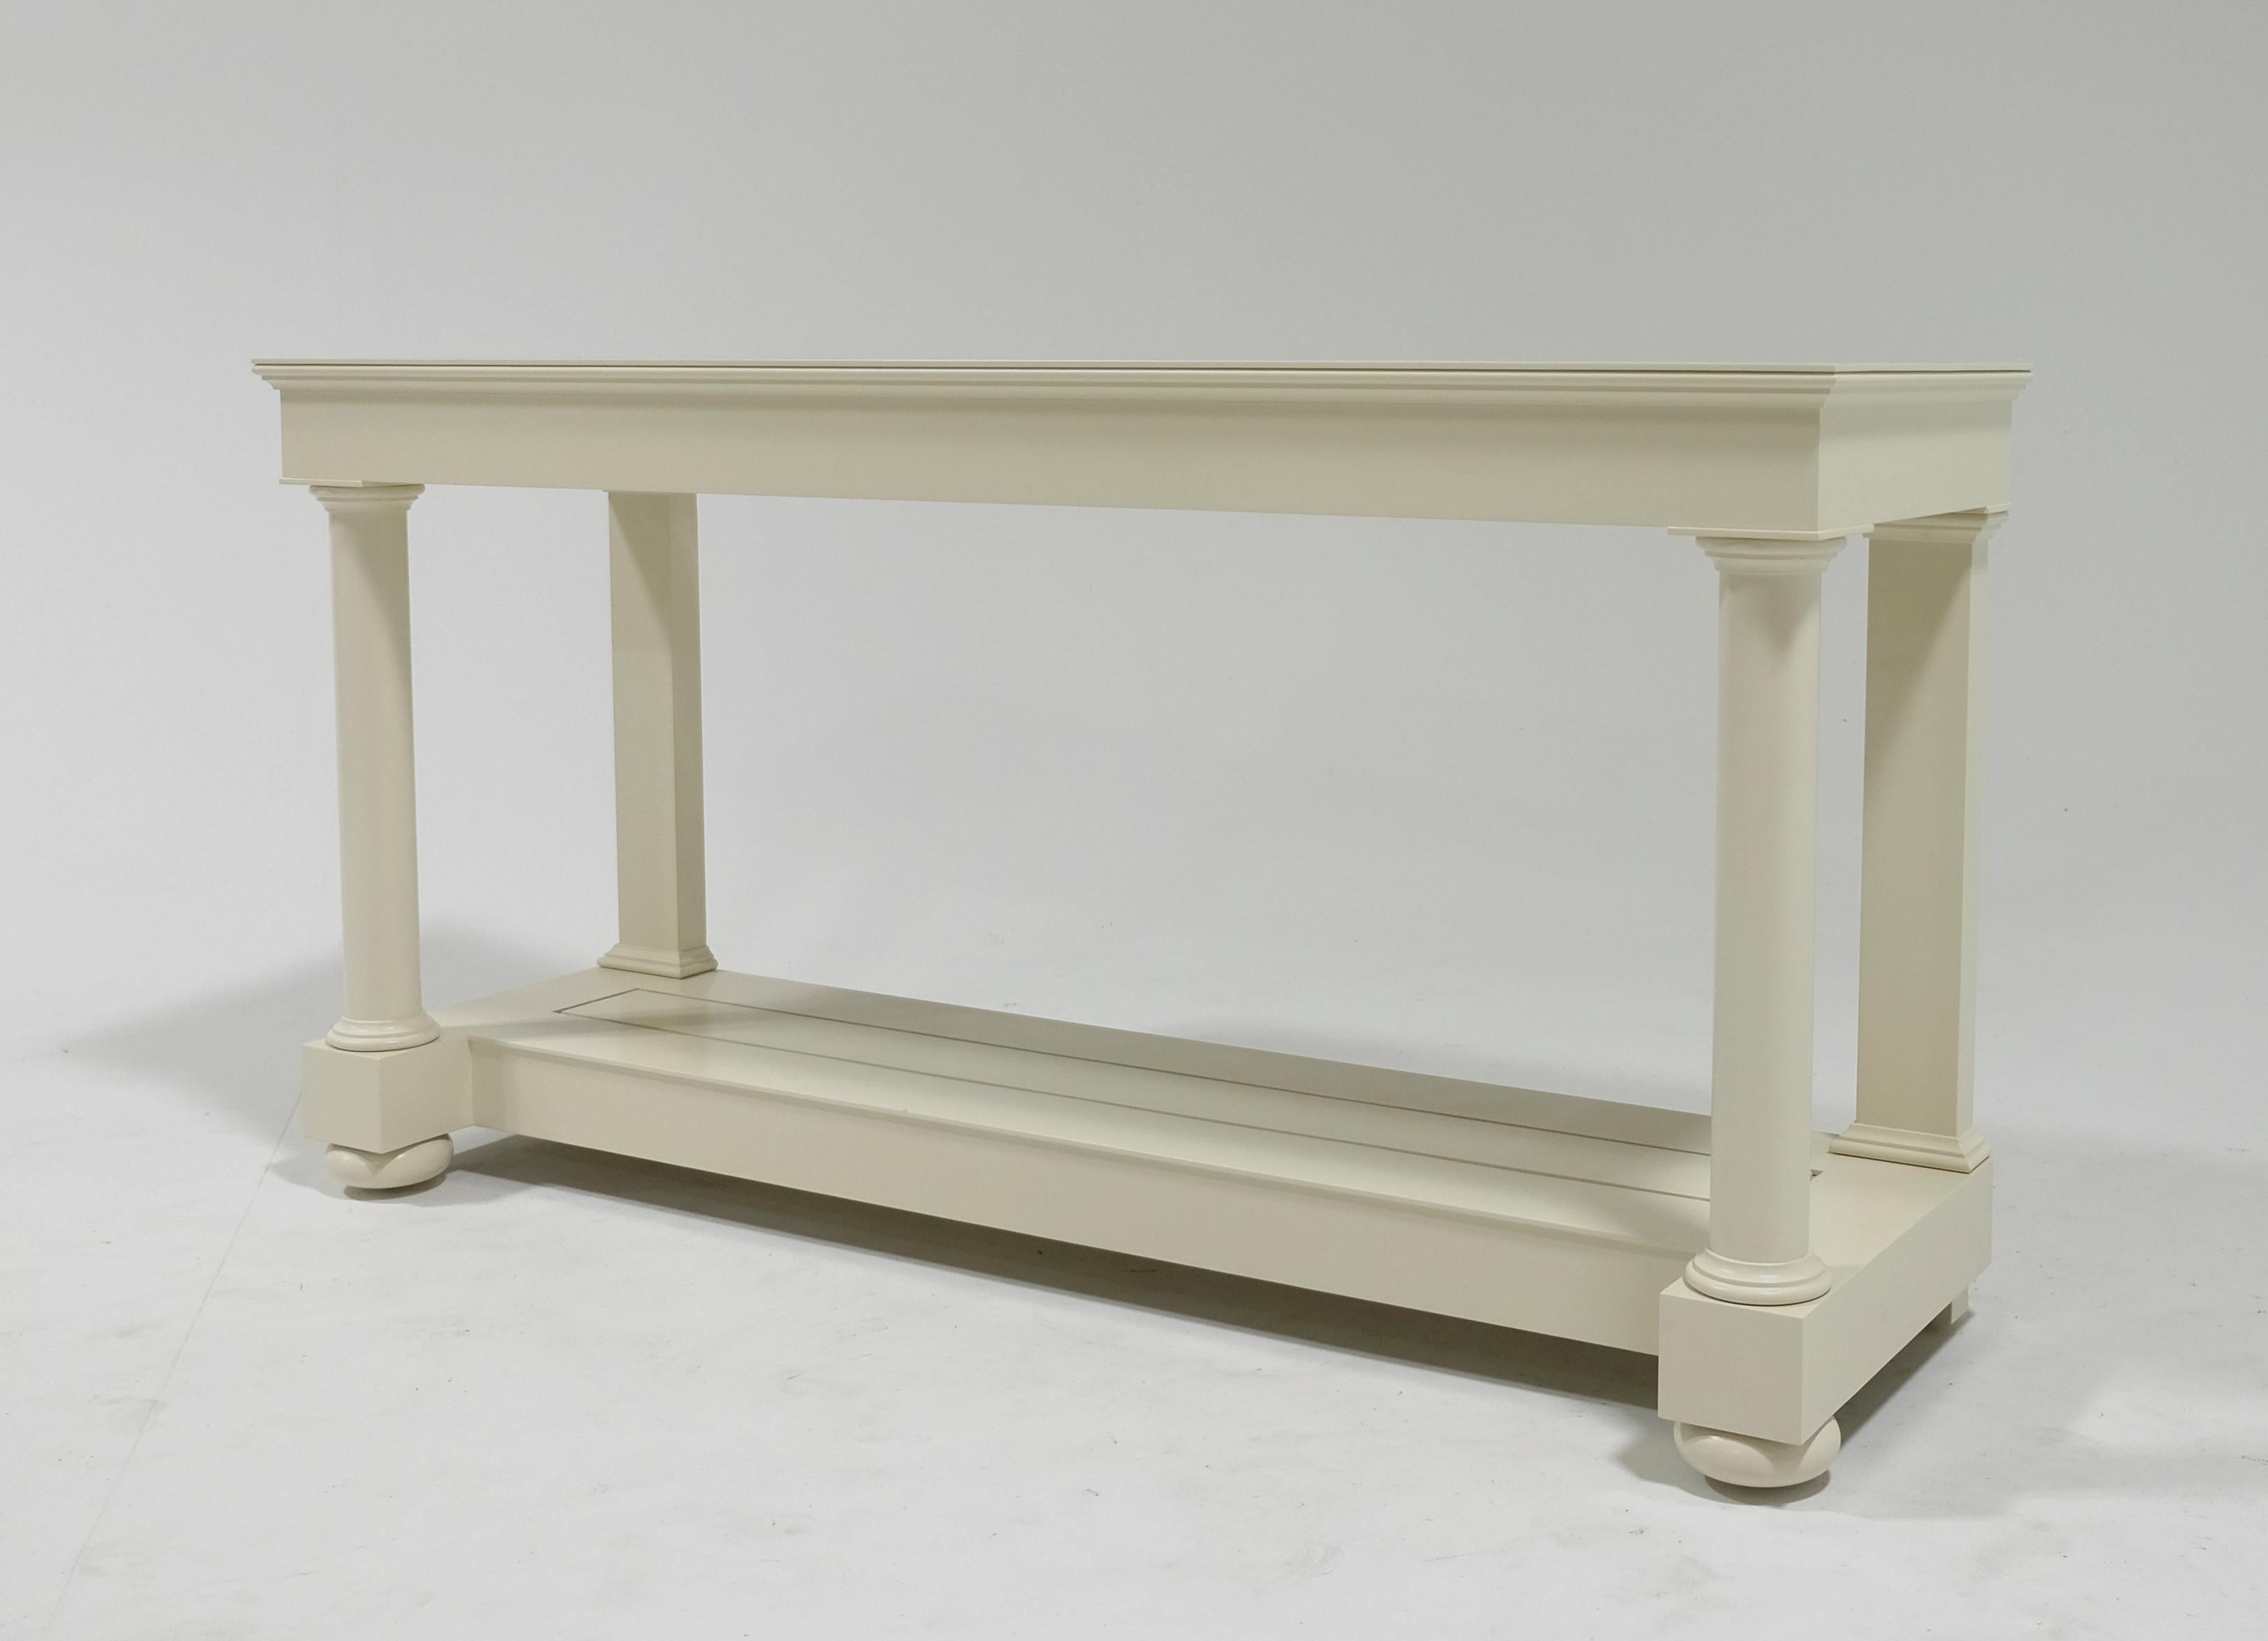 McKinnon and Harris Spotswood Pier Table with Adams Big Top in Wicomico White finish. High performance outdoor aluminum furniture for estate, garden, and yacht. This piece takes garden entertaining to another level. Classical columns and pilasters